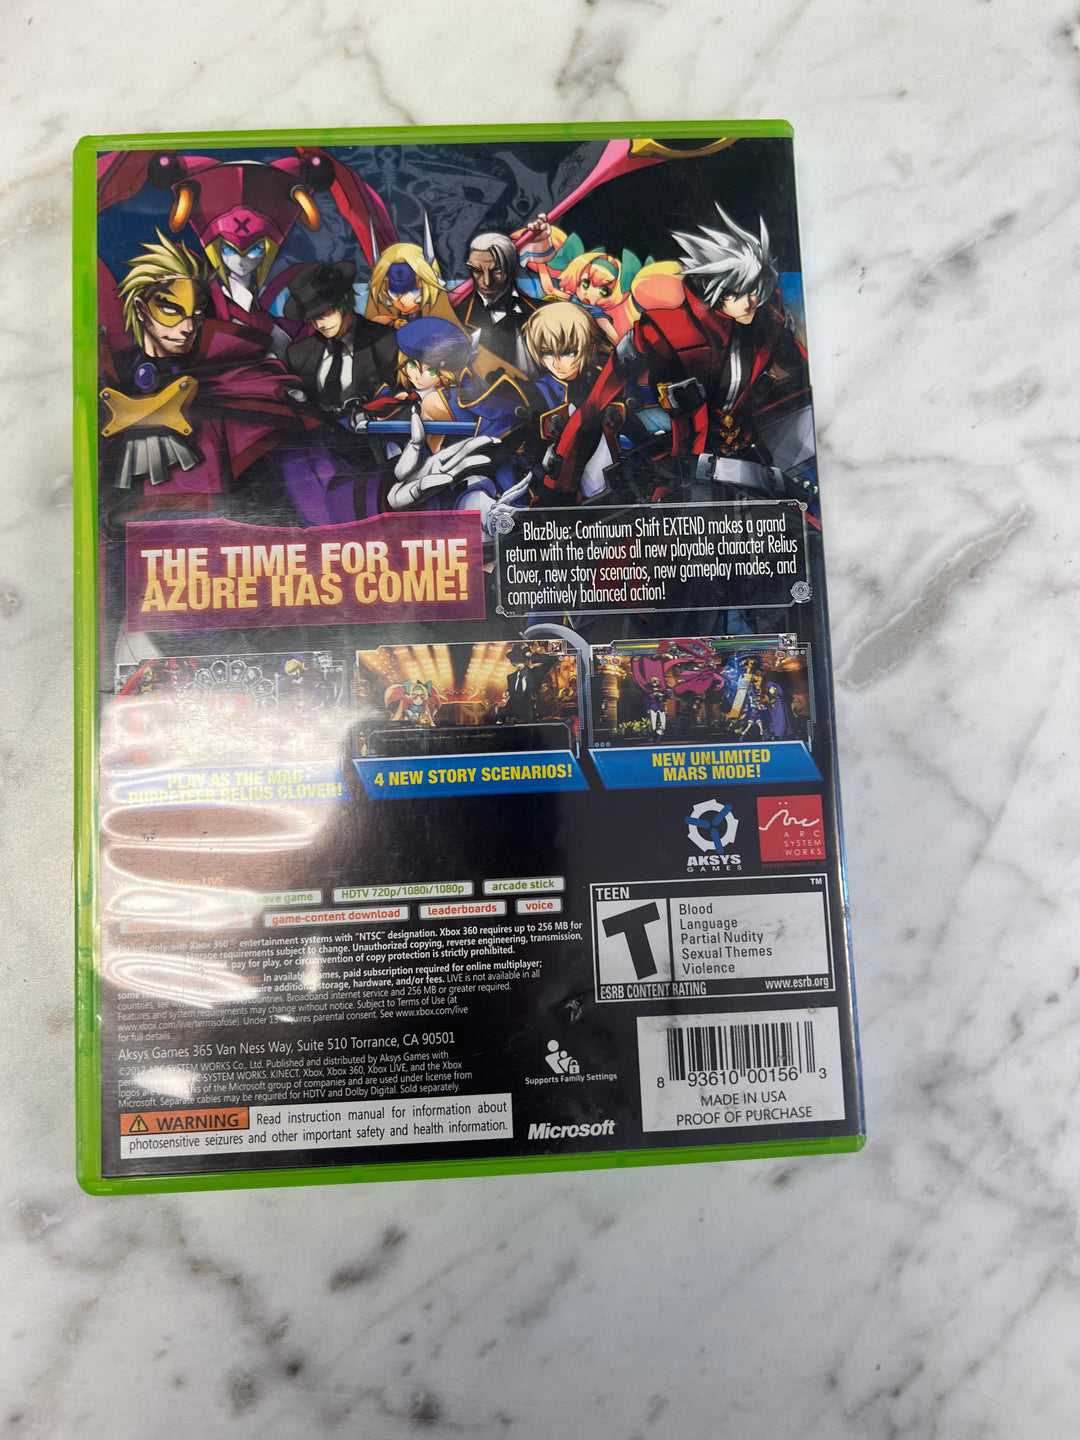 Blazblue Continuum Shift Extend for Microsoft Xbox 360 in case. Tested and Working.     DO61124